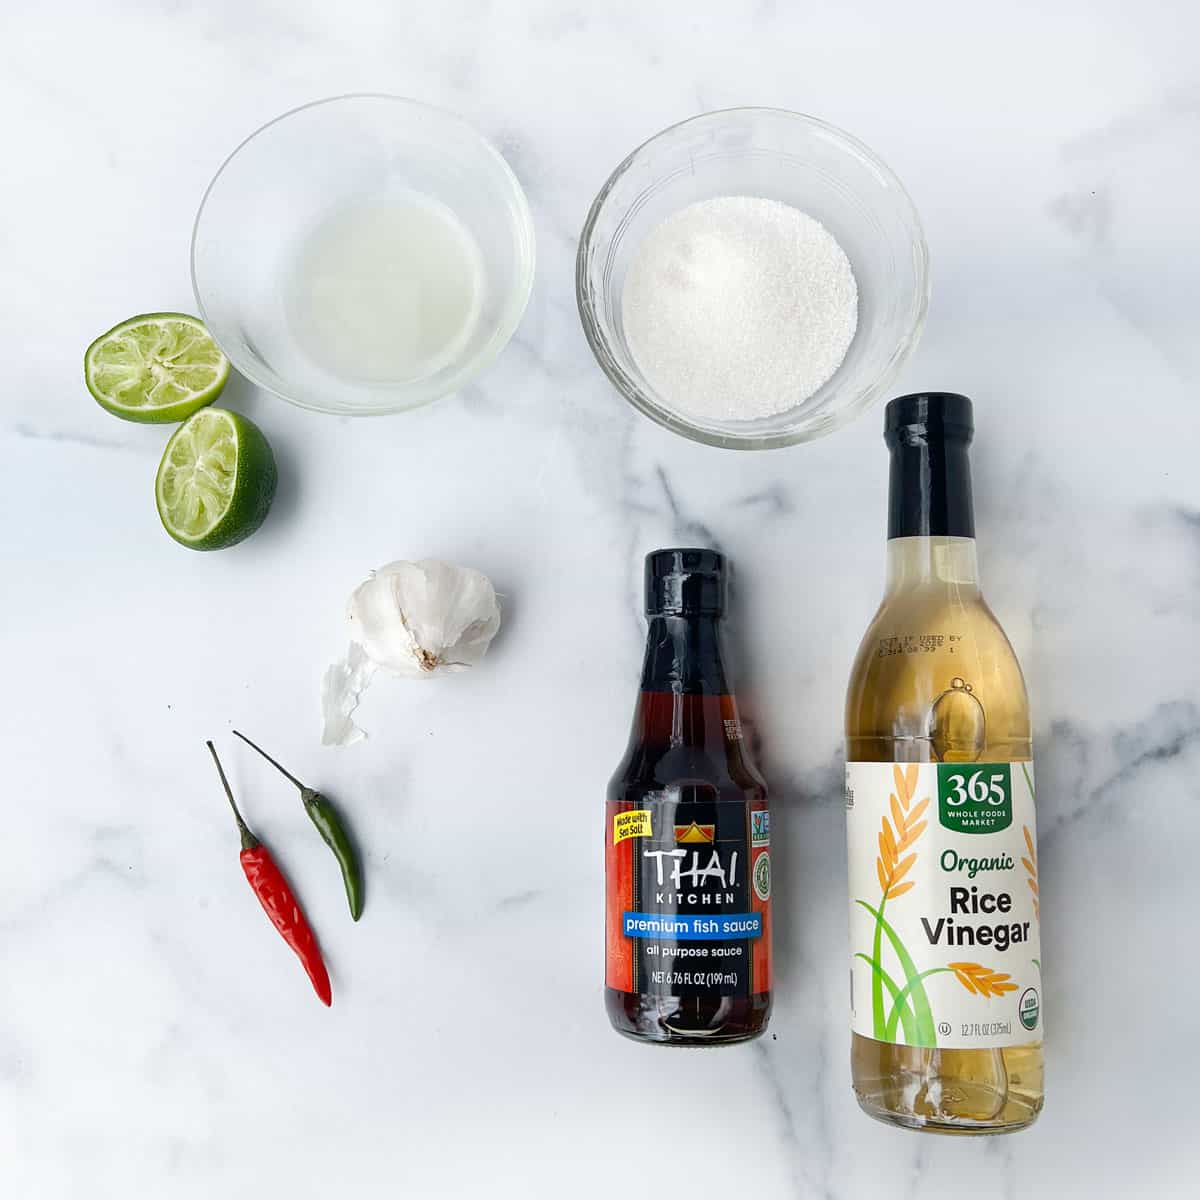 Ingredients on a marble counter: two halves of a squeezed lime, two small Thai chilis, bulb of garlic, bowl of white sugar, bowl of lime juice, bottle of fish sauce and bottle of rice vinegar.